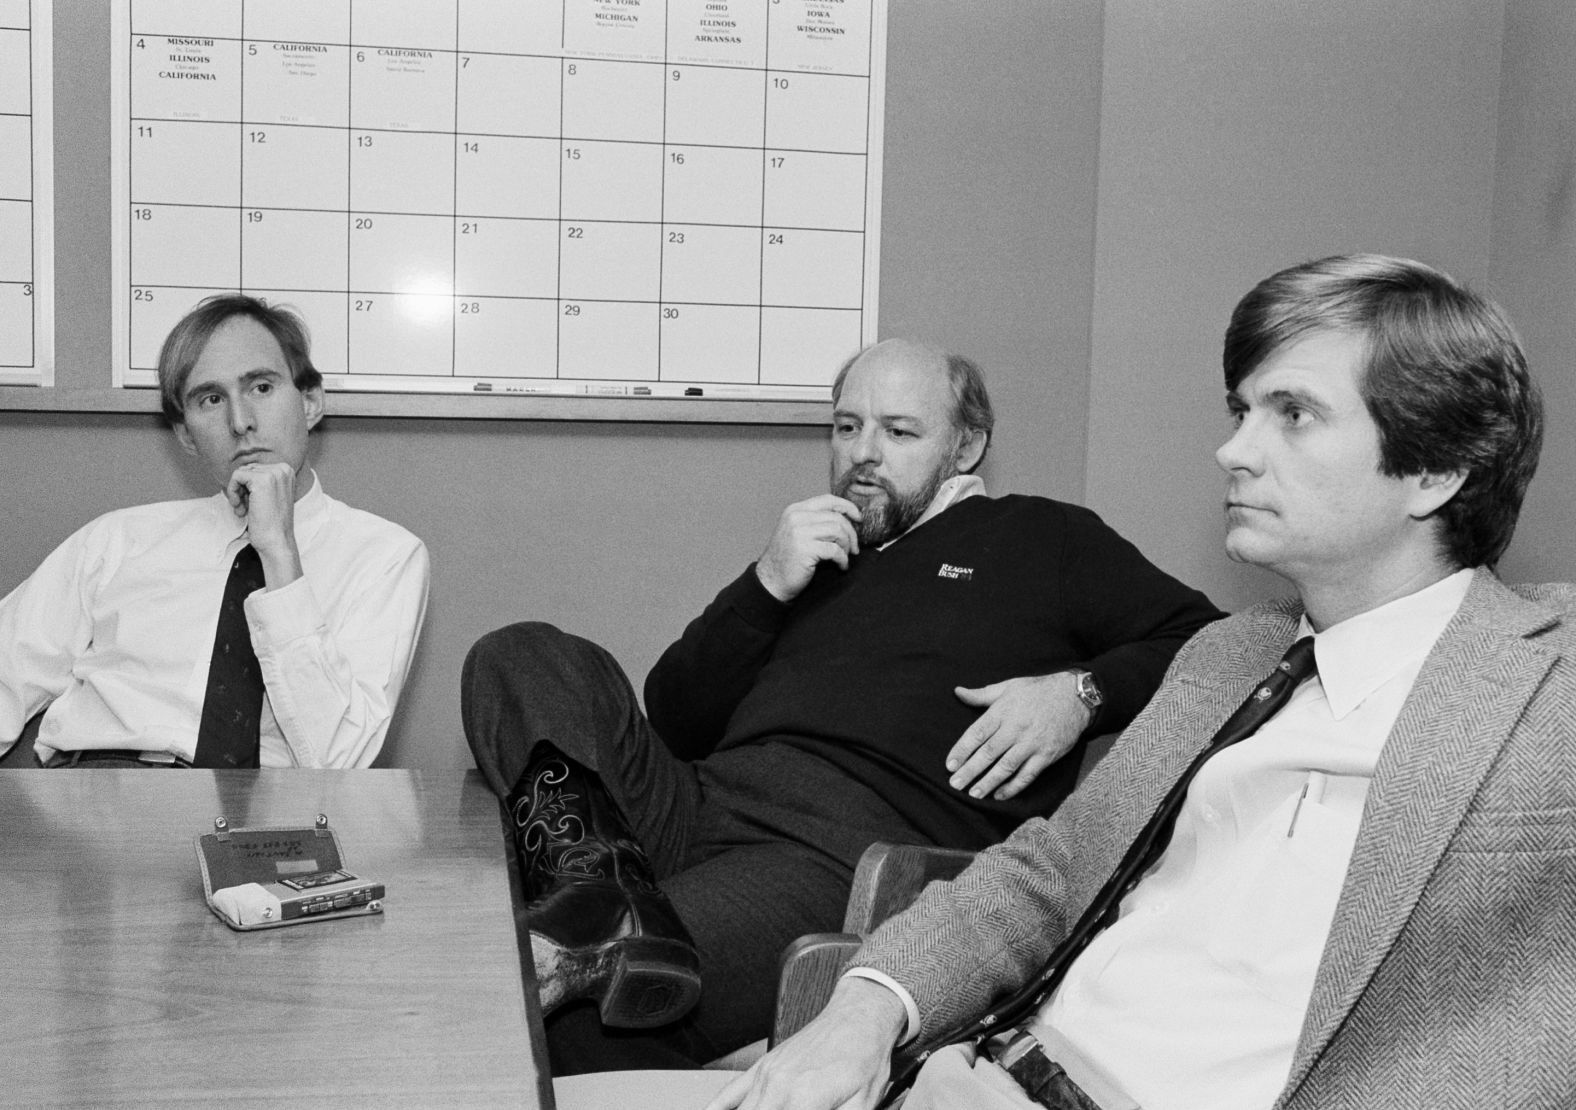 Stone, left, and fellow Reagan campaign operatives Ed Rollins and Lee Atwater discuss a meeting they had with former President Richard Nixon during Reagan's re-election campaign in November 1984.